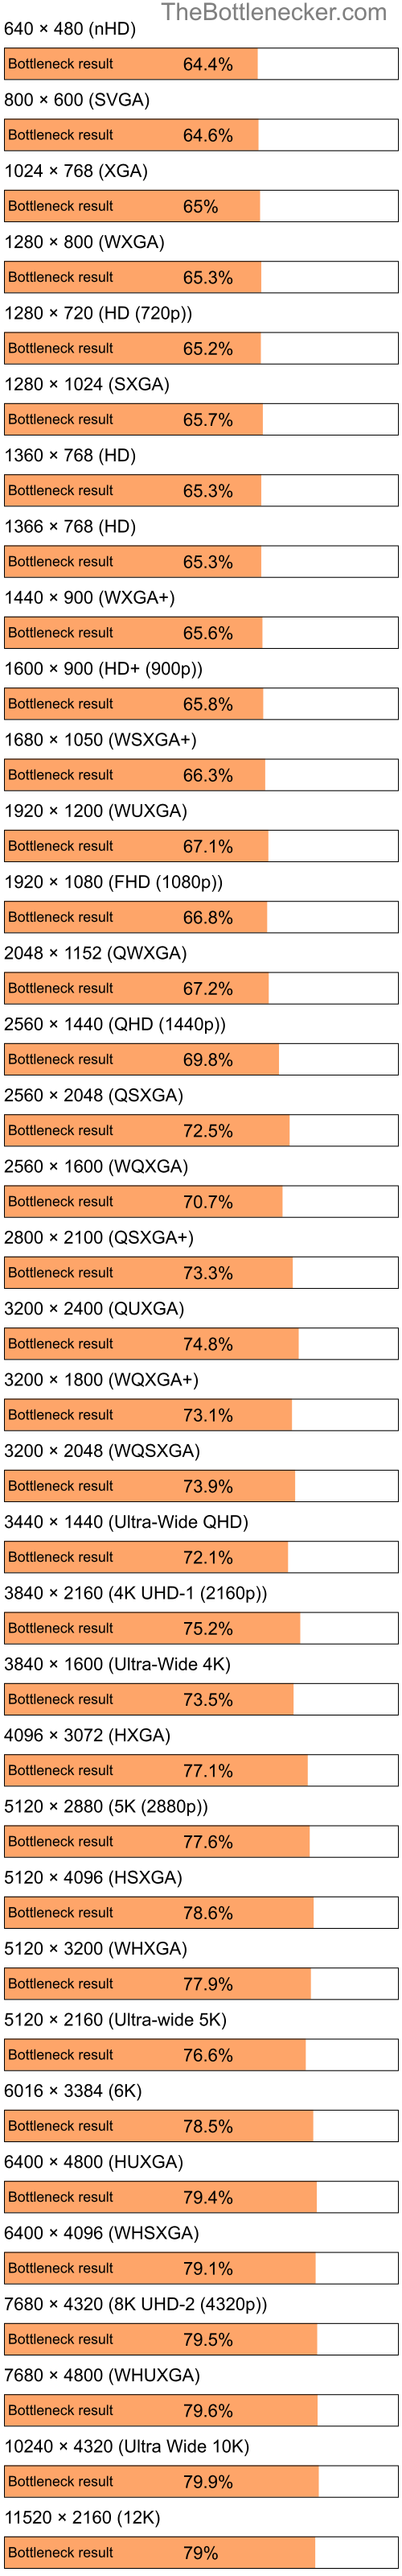 Bottleneck results by resolution for Intel Atom Z520 and NVIDIA Quadro NVS 295 in General Tasks